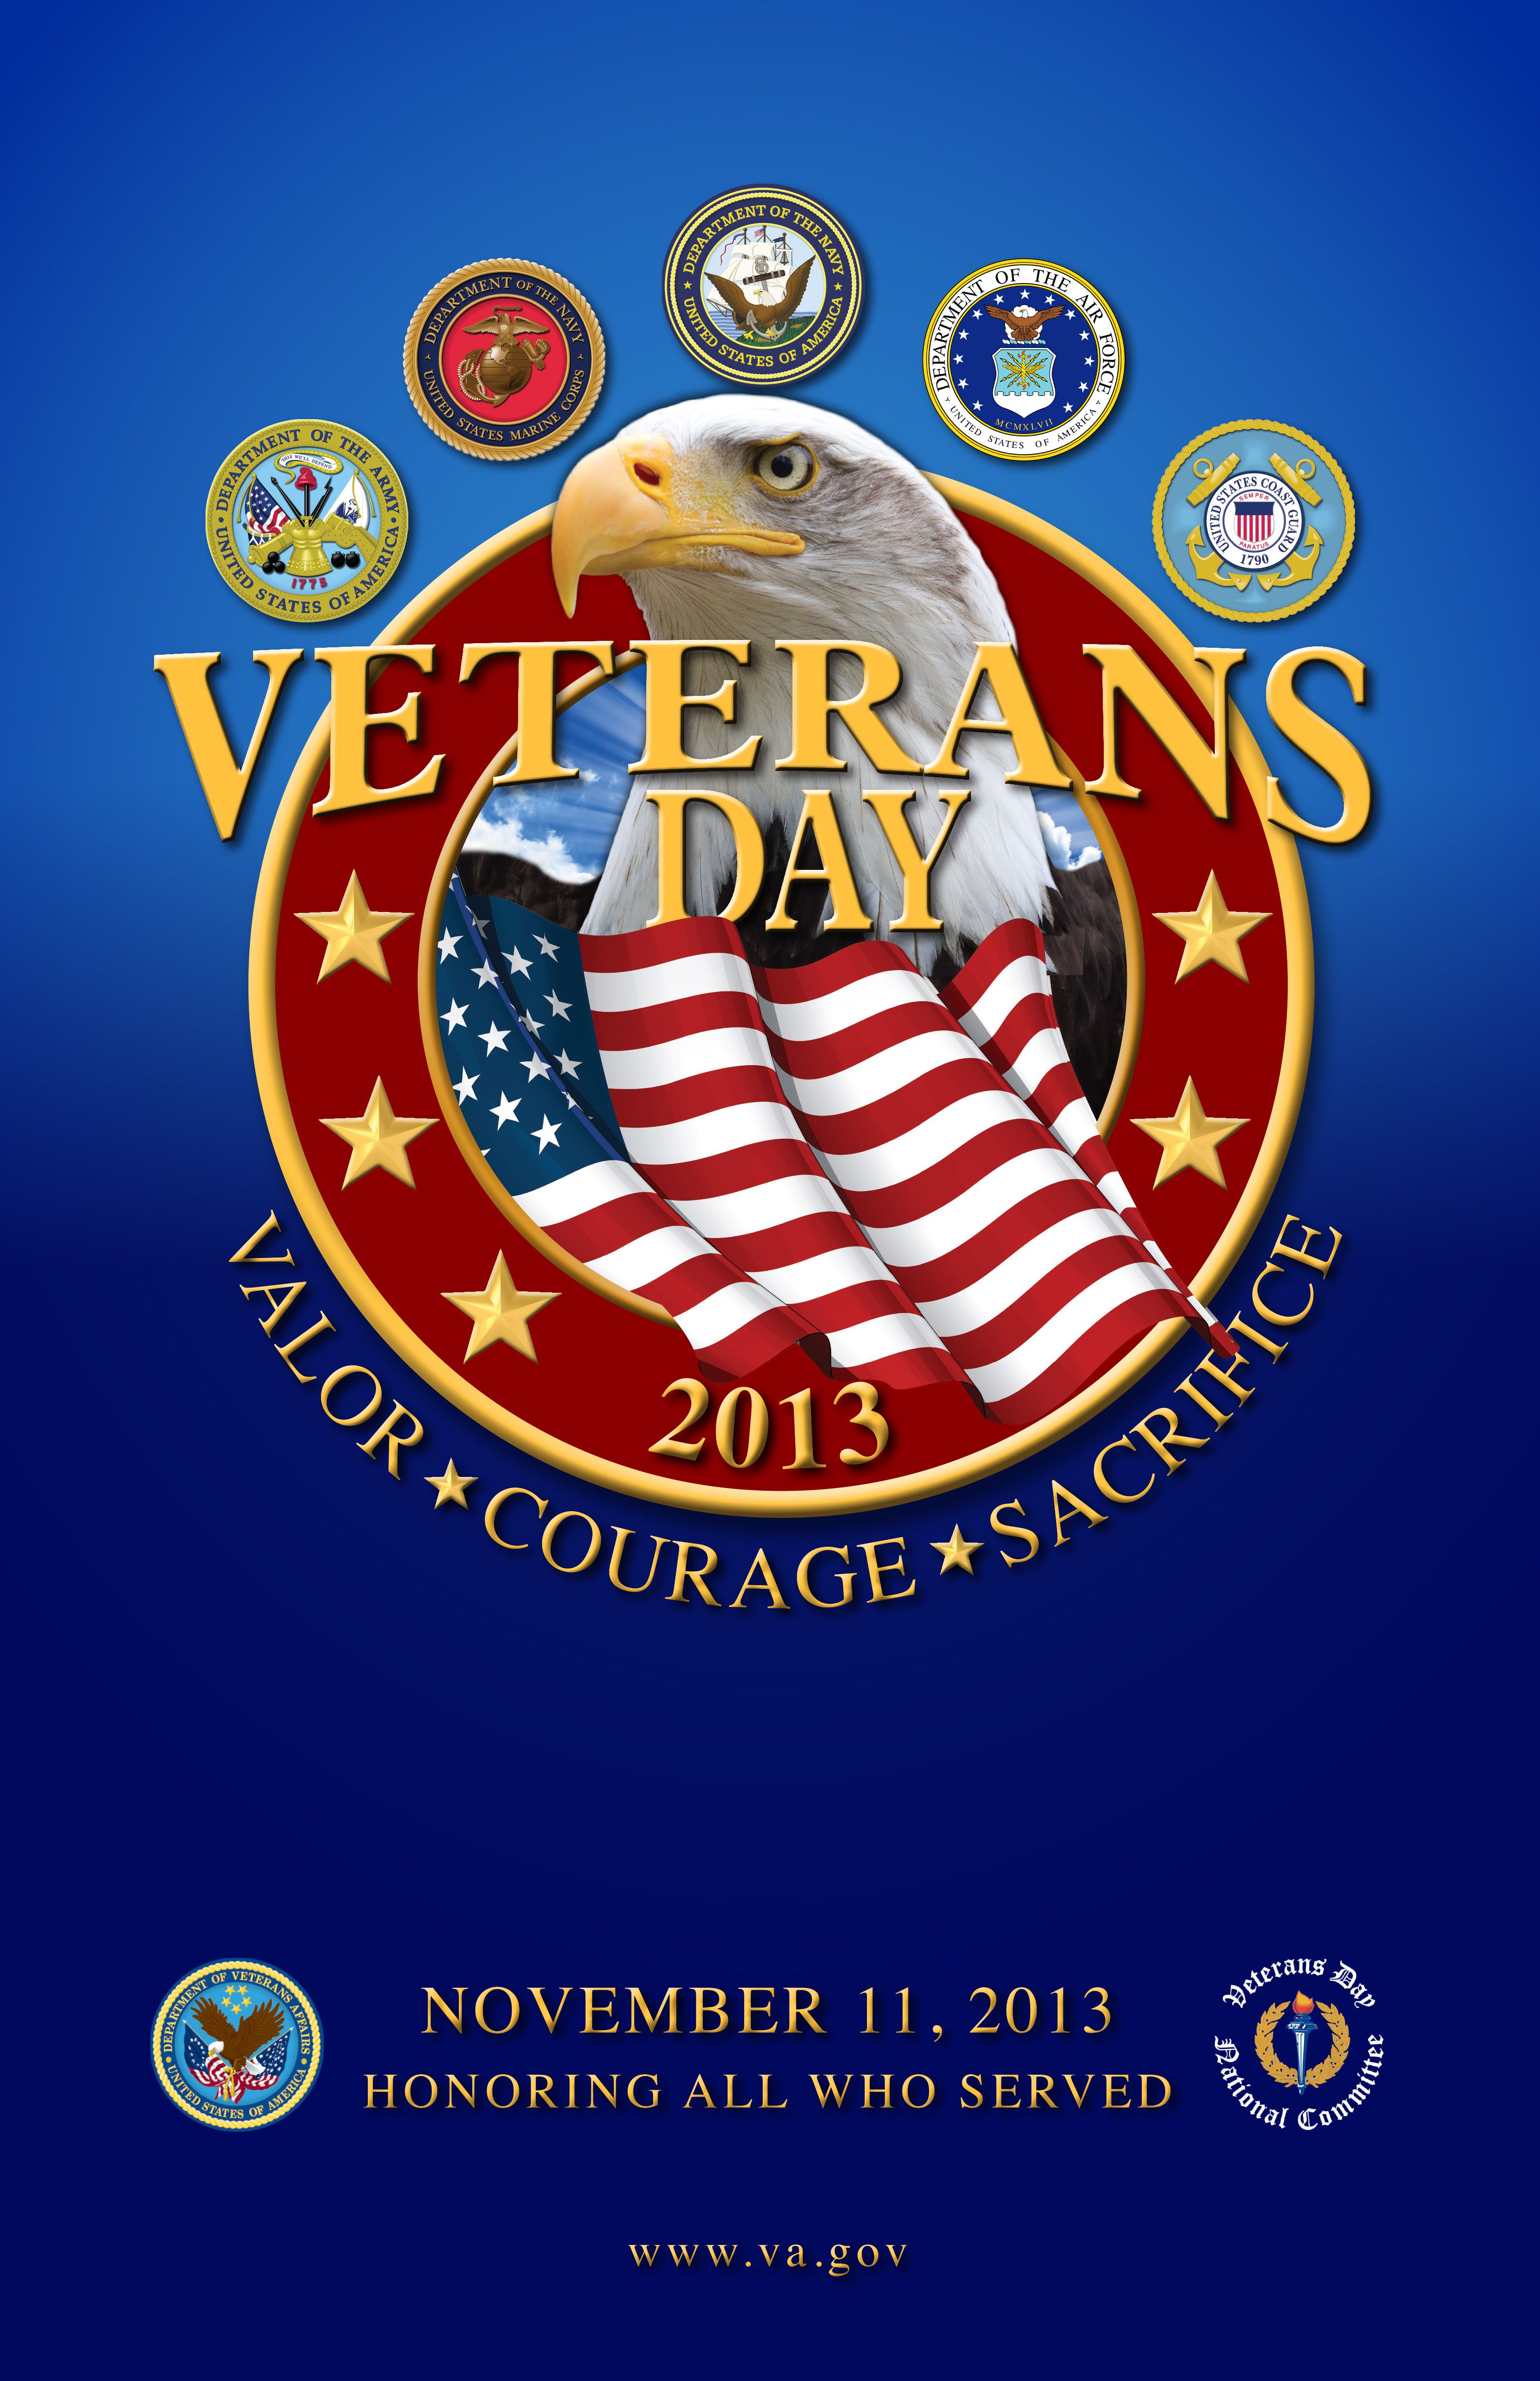 Veterans Day Poster Gallery of Public